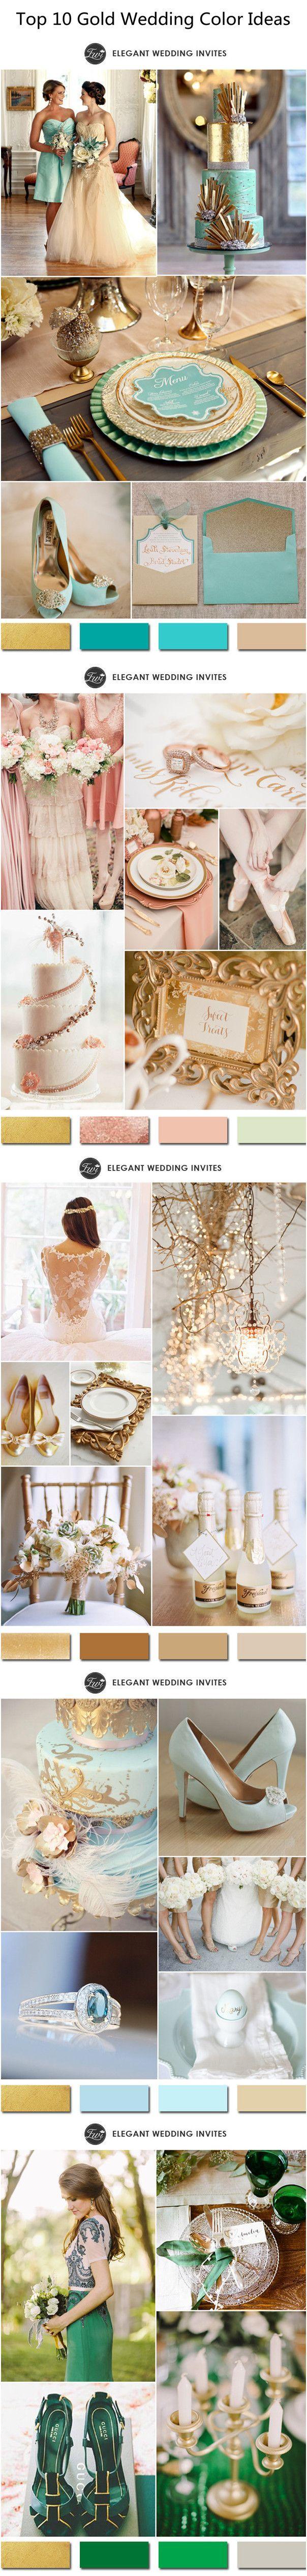 Wedding - 10 Hottest Gold Wedding Color Ideas-2016 Wedding Trends Part Two